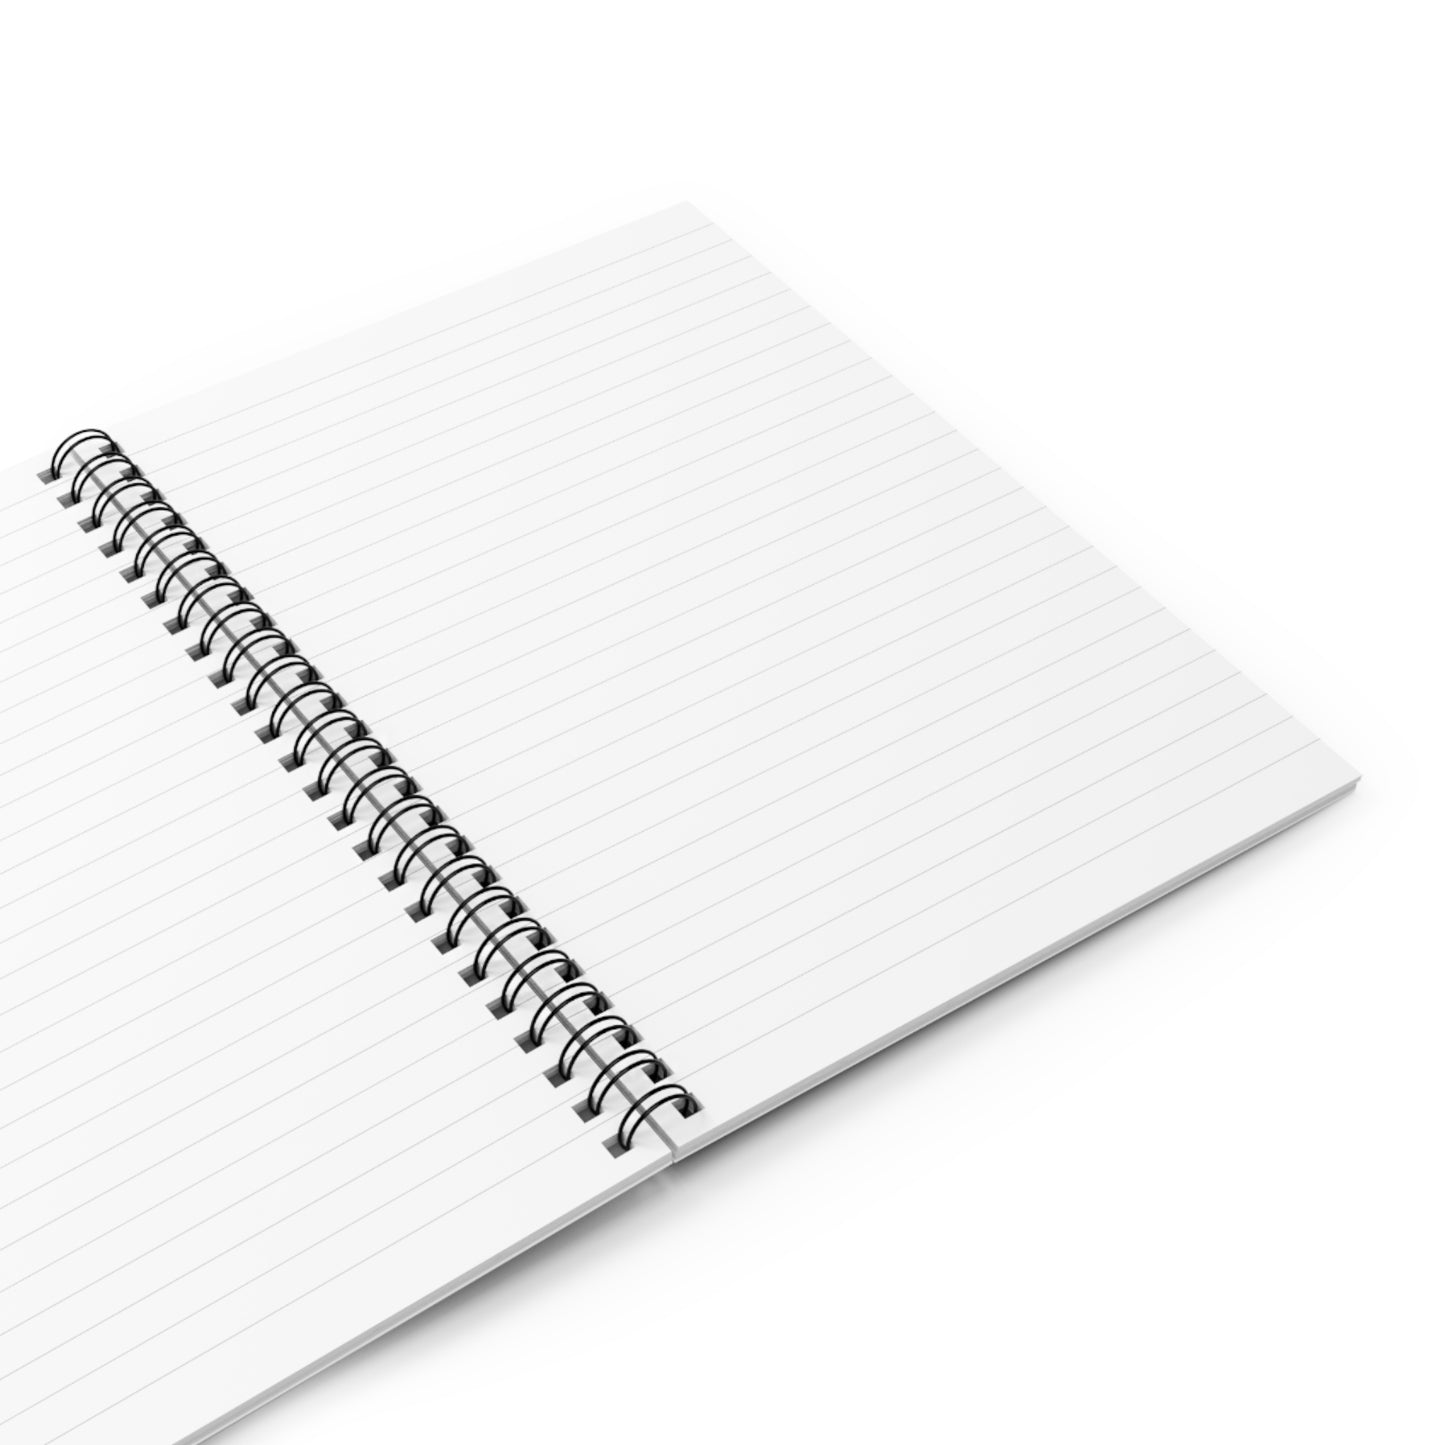 Taylor - Ruled Line Notebook